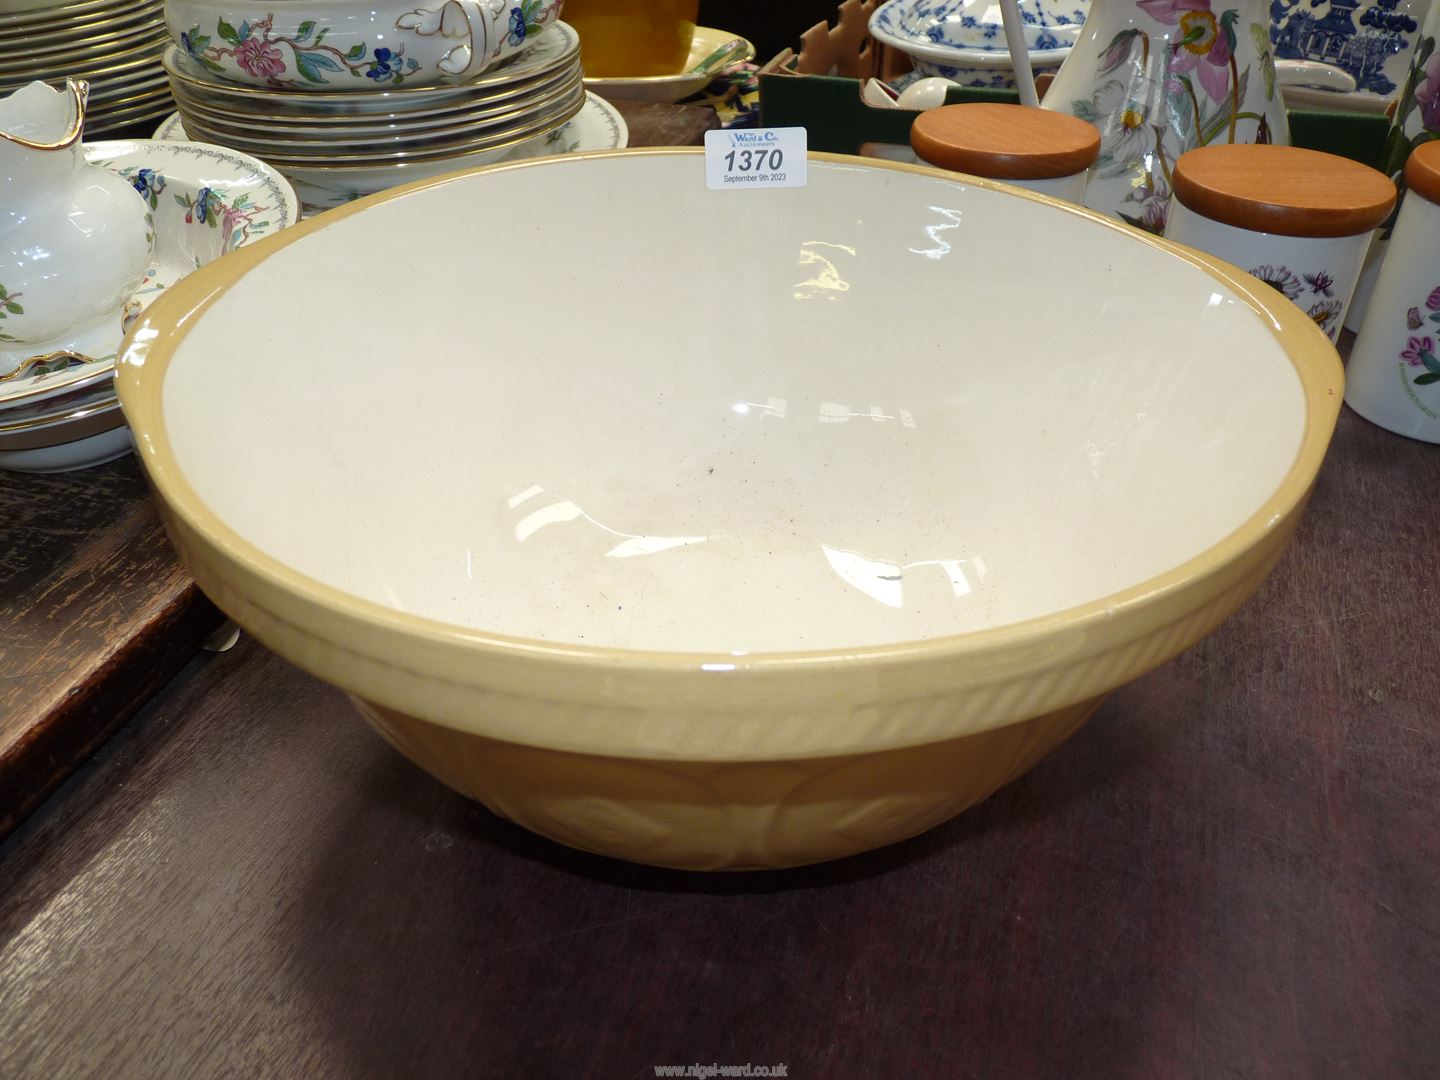 A T.G. Green mixing bowl, 12" diameter, some crazing.